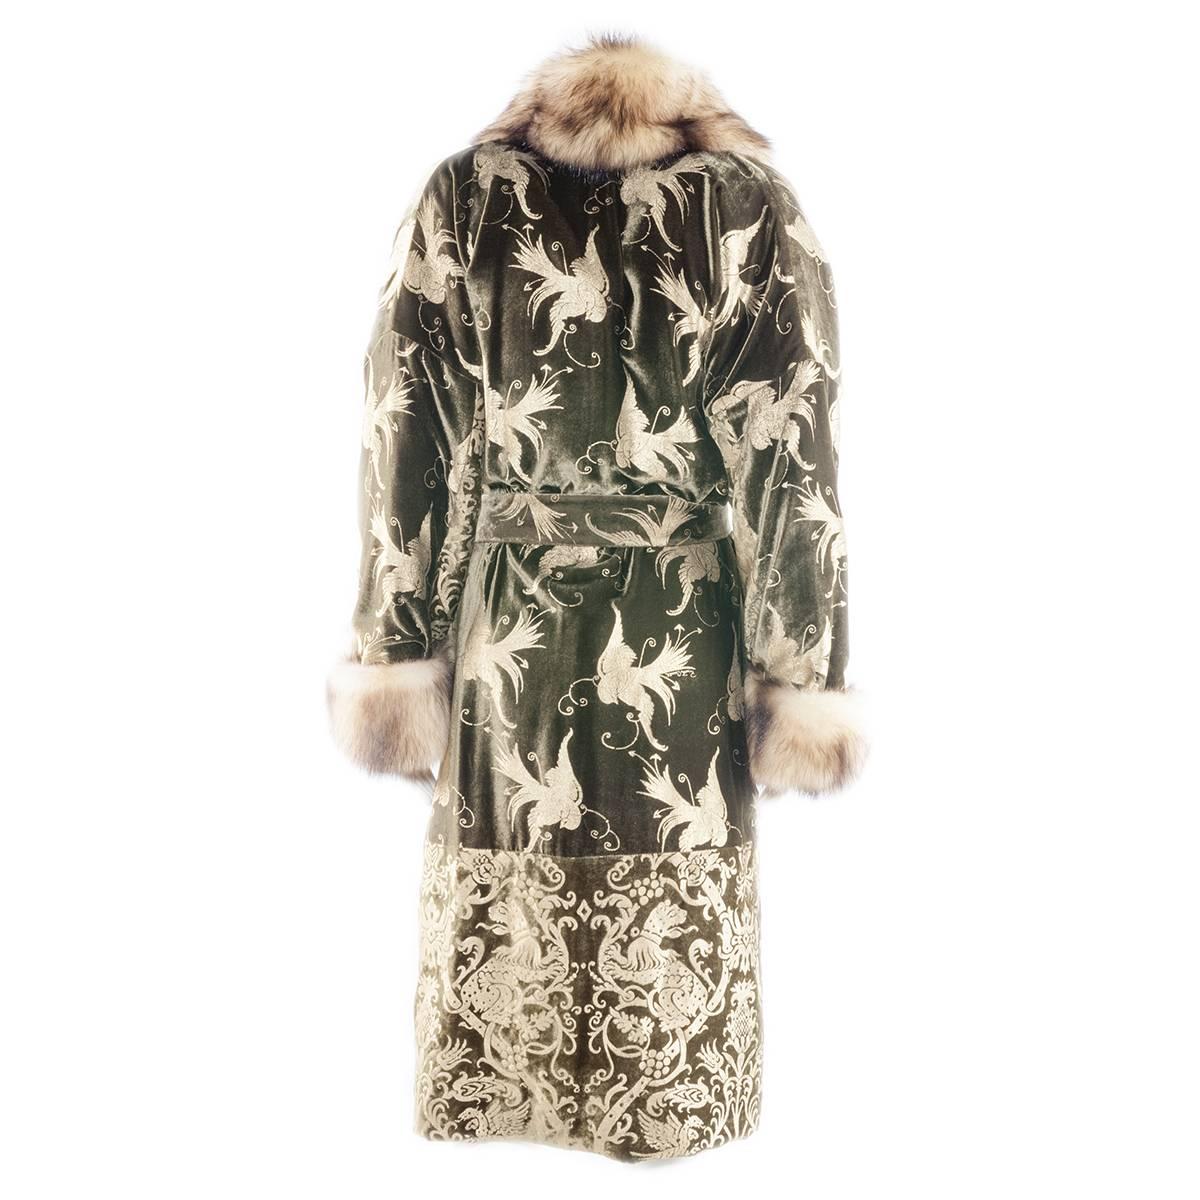 Real masterpiece by Roberto Cavalli
2006 Collection
Olive green velvet 
Golden embroidered brocade
Silk lining
Honey colored skunk fur on collar and wrists
Italian size 42 (US 8)
Made in Italy
Worldwide express shipping included in the price